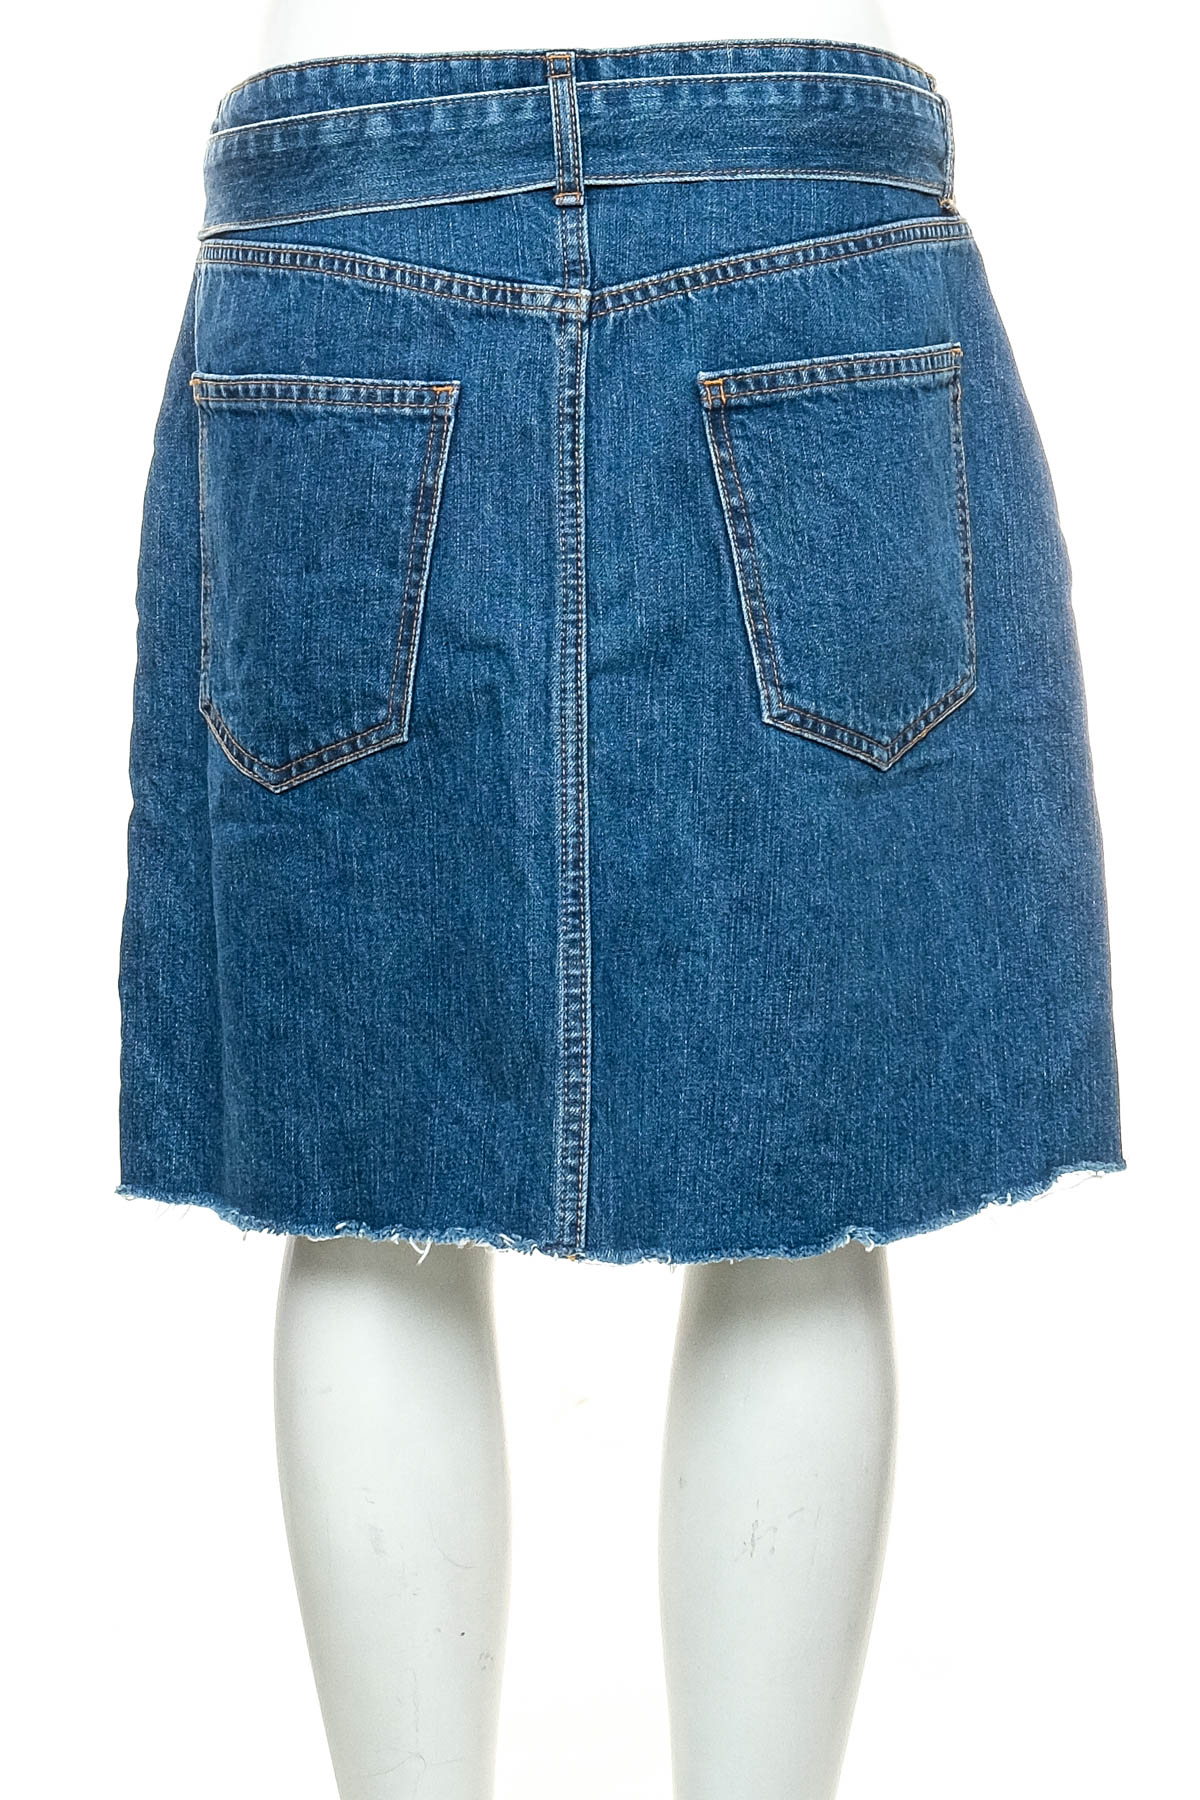 Denim skirt - G perfect jeans by Gina Tricot - 1